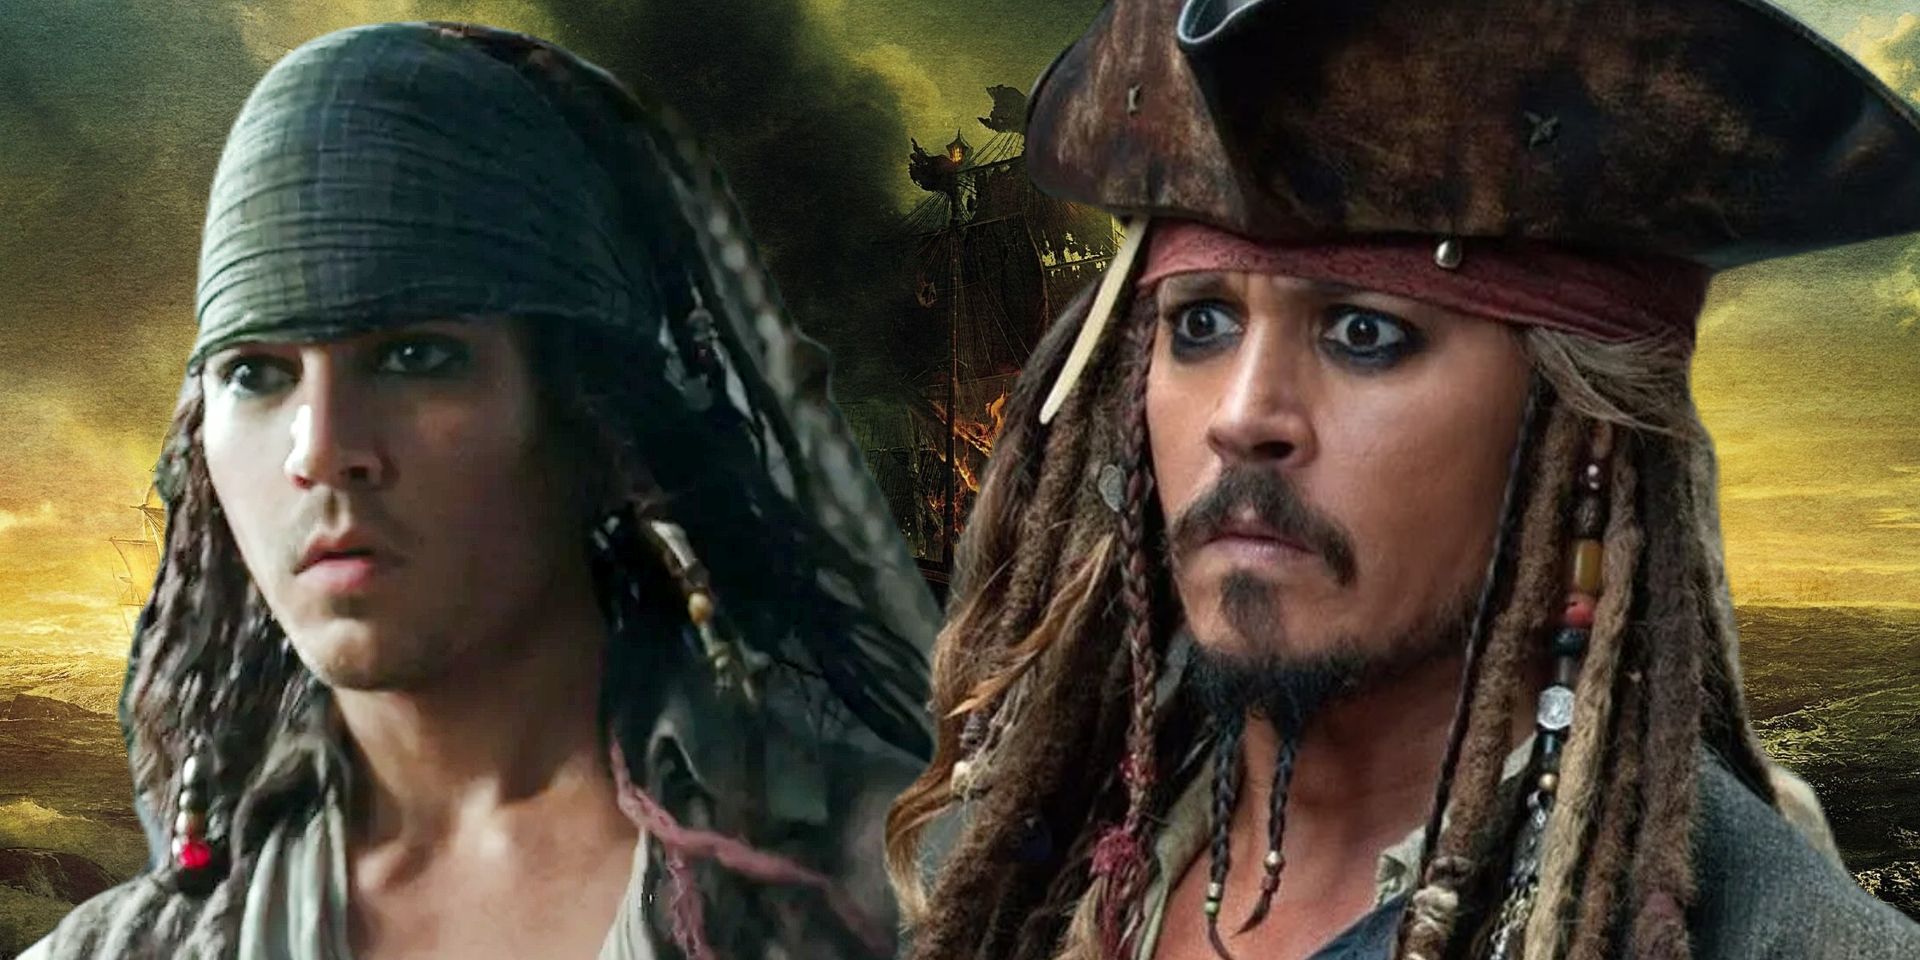 Why Pirates Of The Caribbean 5 Got Johnny Depp's Jack Sparrow So Wrong